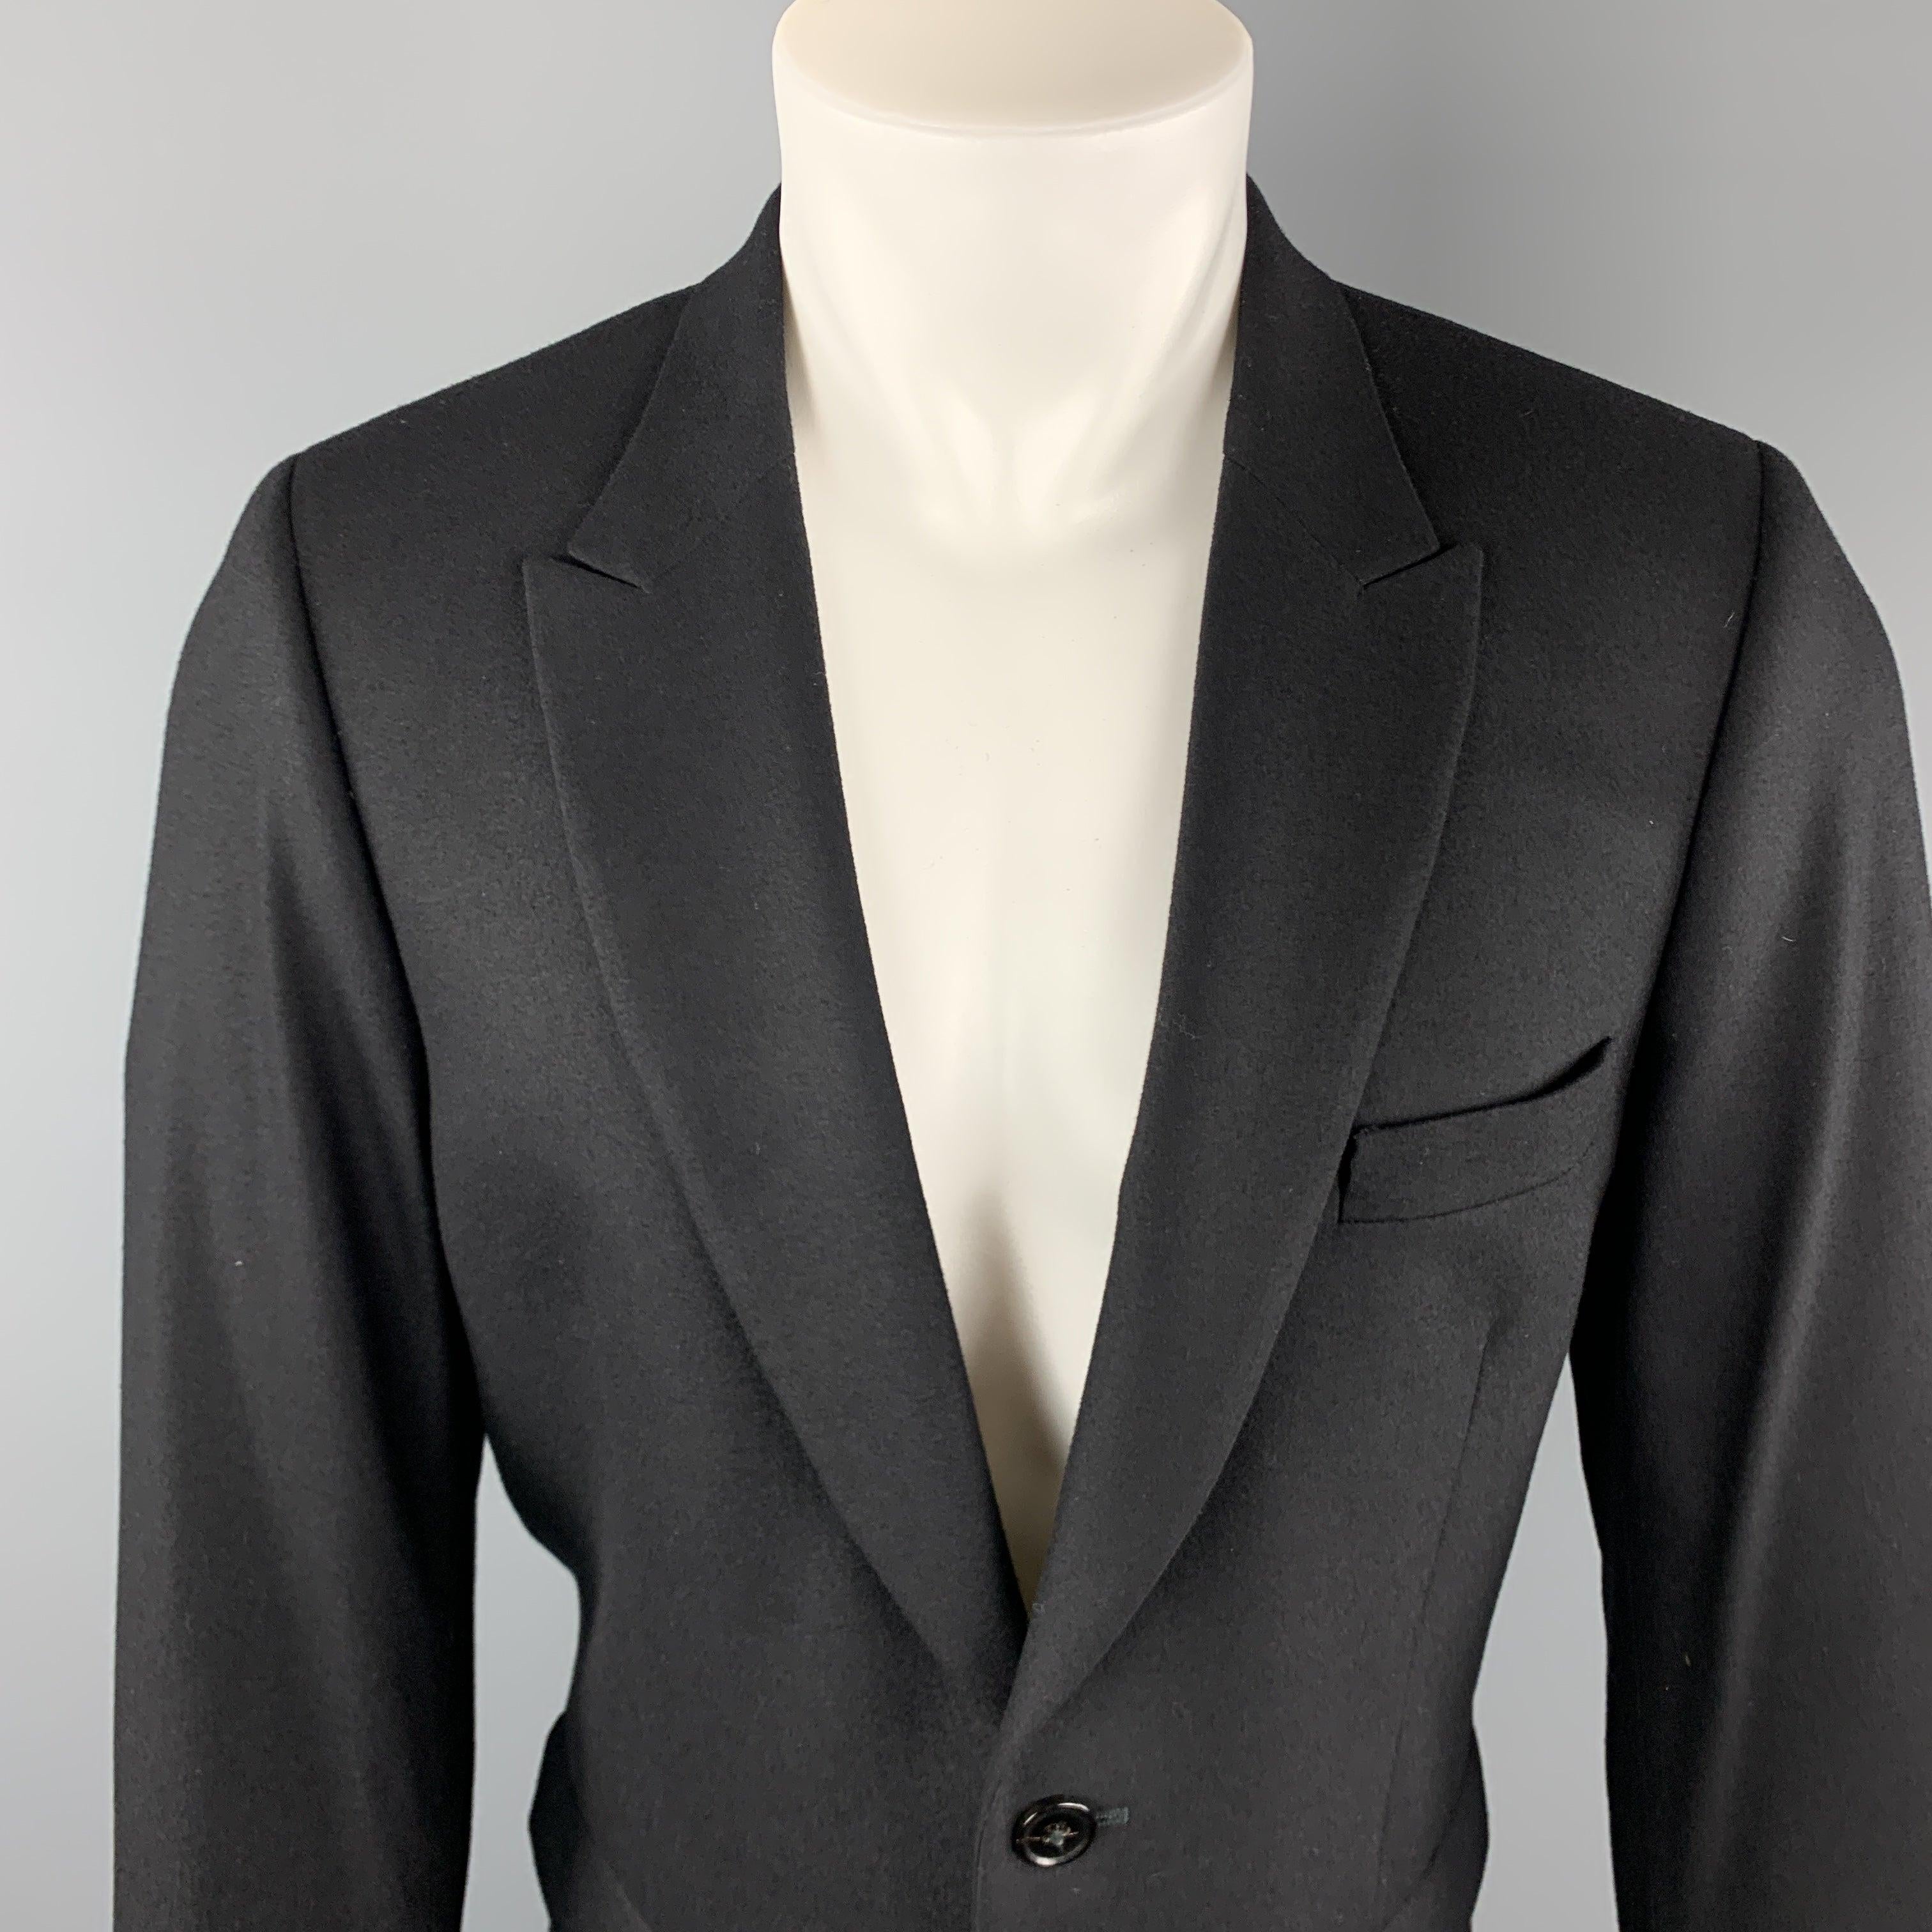 PAUL SMITH
sport coat comes in black wool cashmere blend with a peak lapel, single breasted, two button front, and double vented back. Made in Italy.Excellent Pre-Owned Condition. 

Marked:   40 

Measurements: 
 
Shoulder:
16 inches Chest:
42